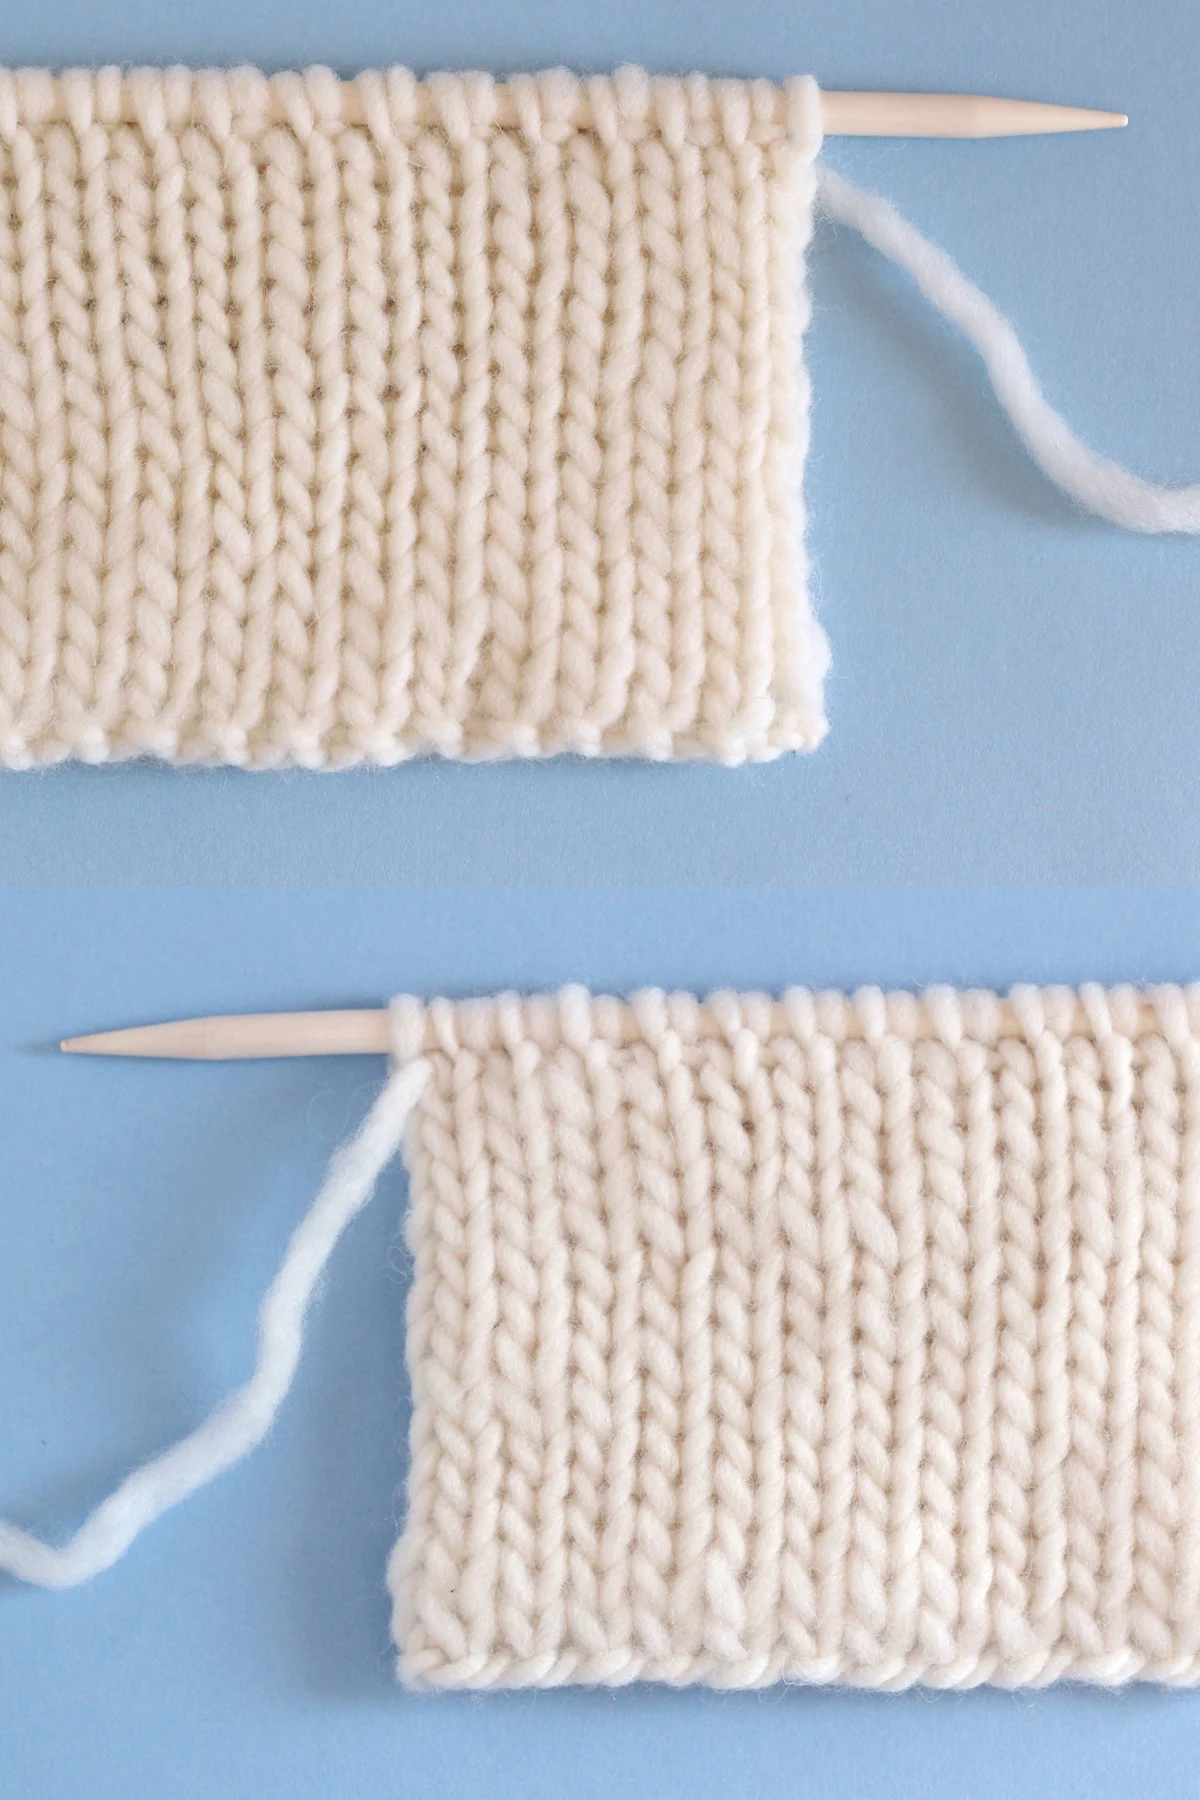 Double Stockinette stitch on both the right and wrong sides on straight knitting needles.